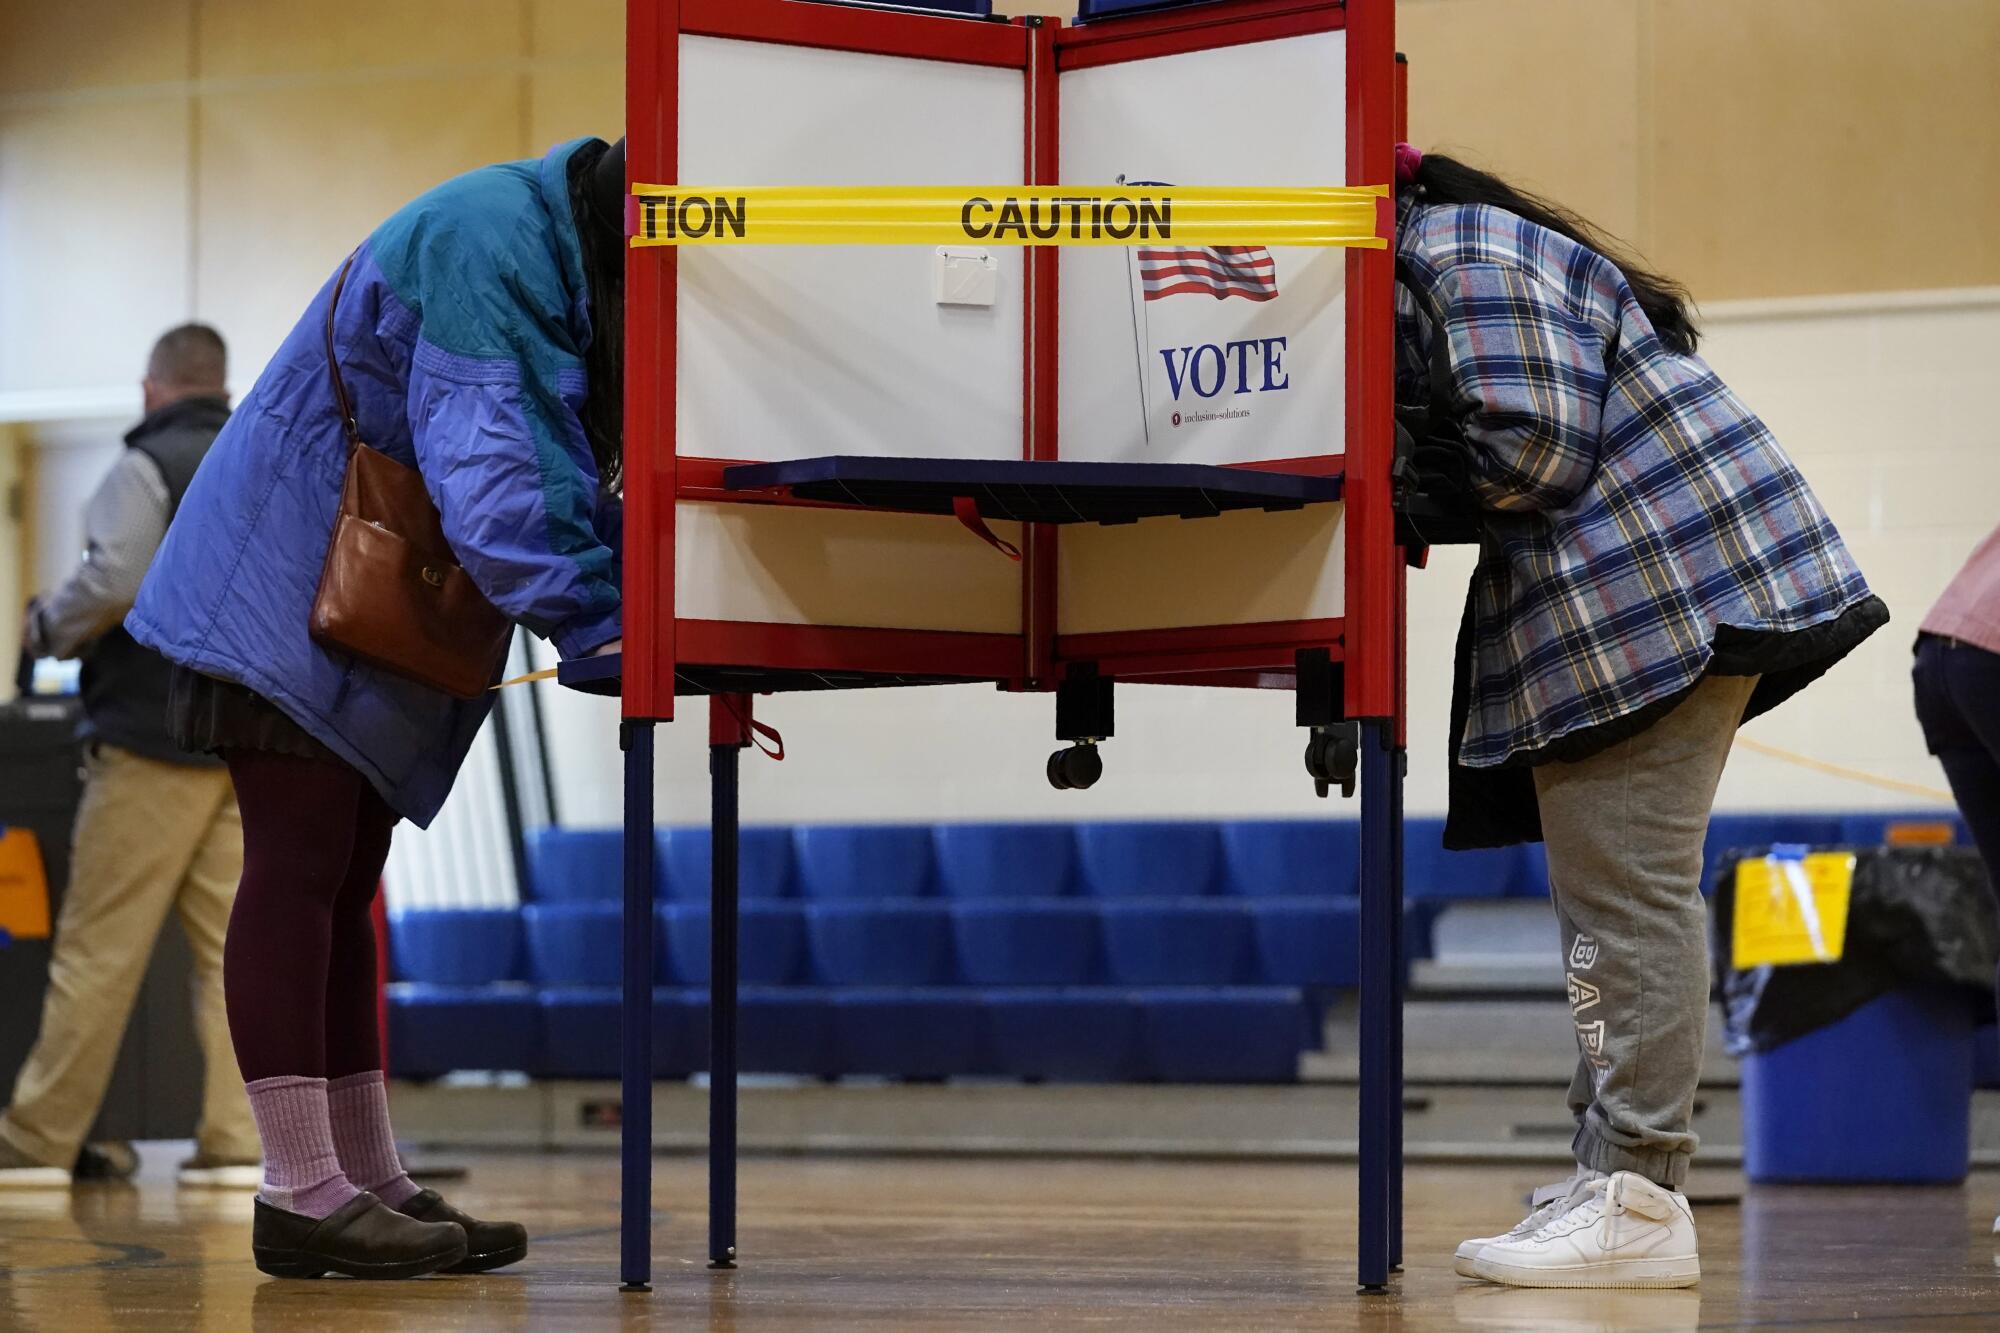 Caution tape closes off a voting stall at the East End School in Portland, Maine, to help distance voters.